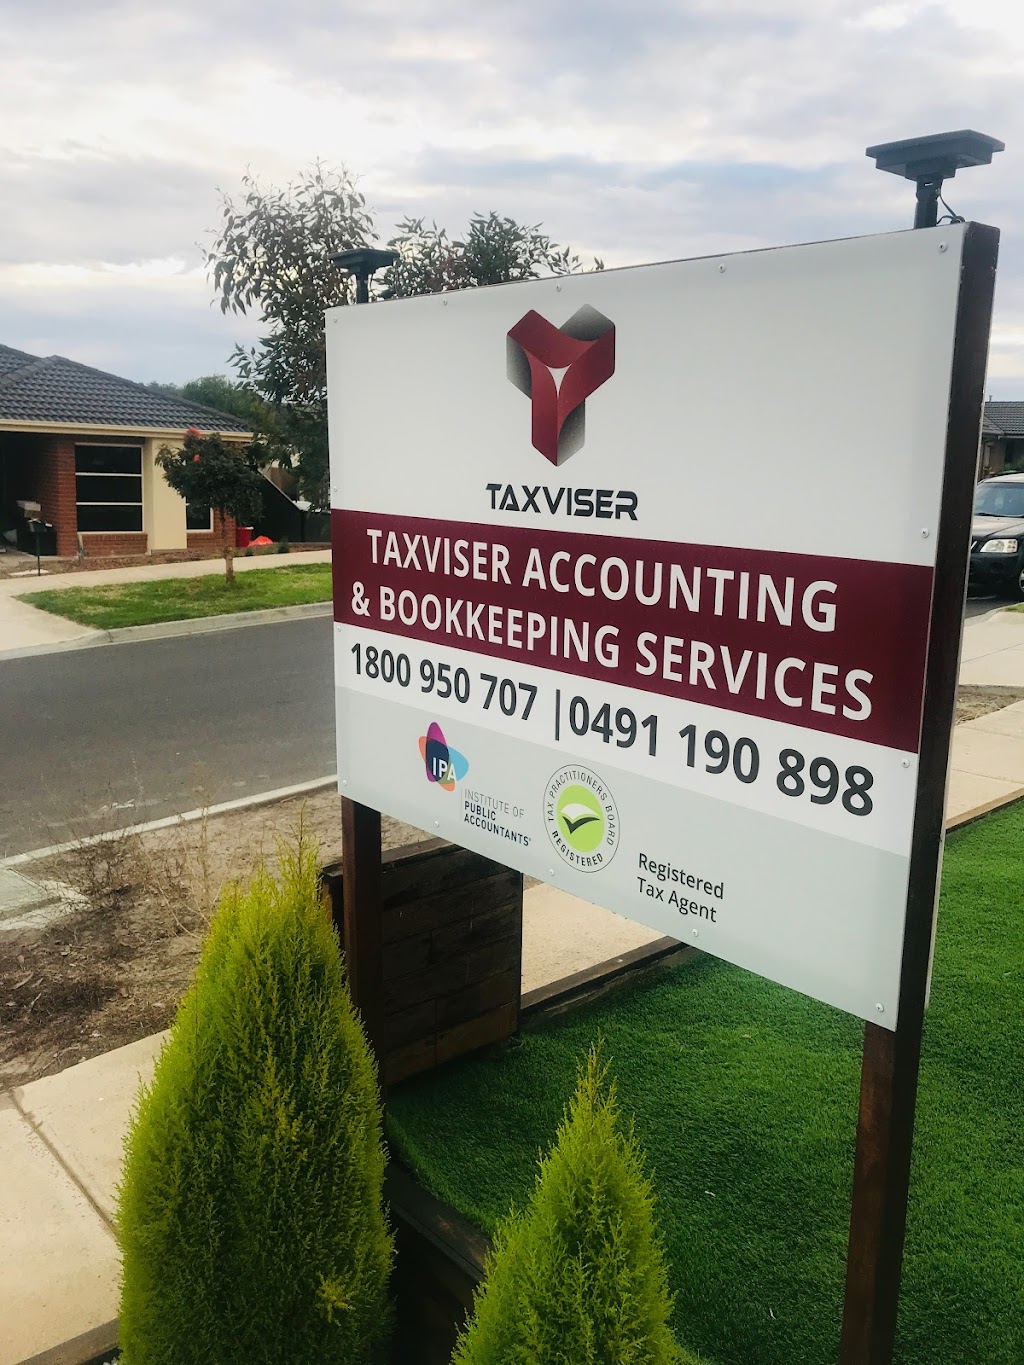 Taxviser Accounting & Bookkeeping Services | accounting | 6 St Pauls Terrace, Mernda VIC 3754, Australia | 0491190898 OR +61 491 190 898